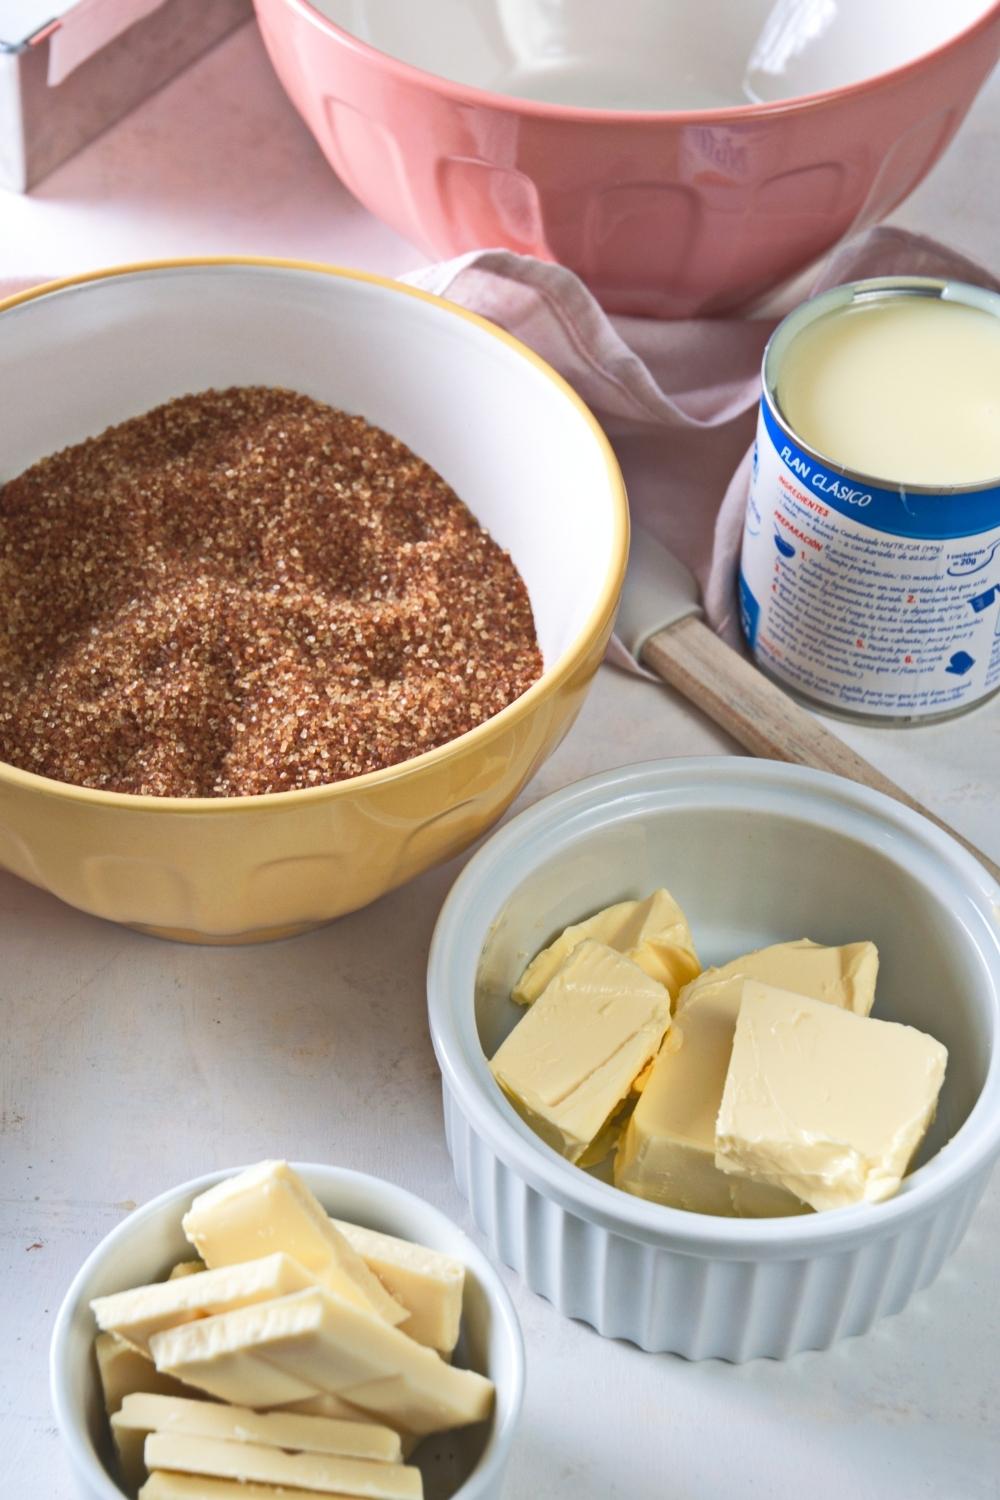 A large bowl containing brown sugar, a medium size bowl containing butter, a can of condensed milk, and a small bowl of white chocolate bar chunks.